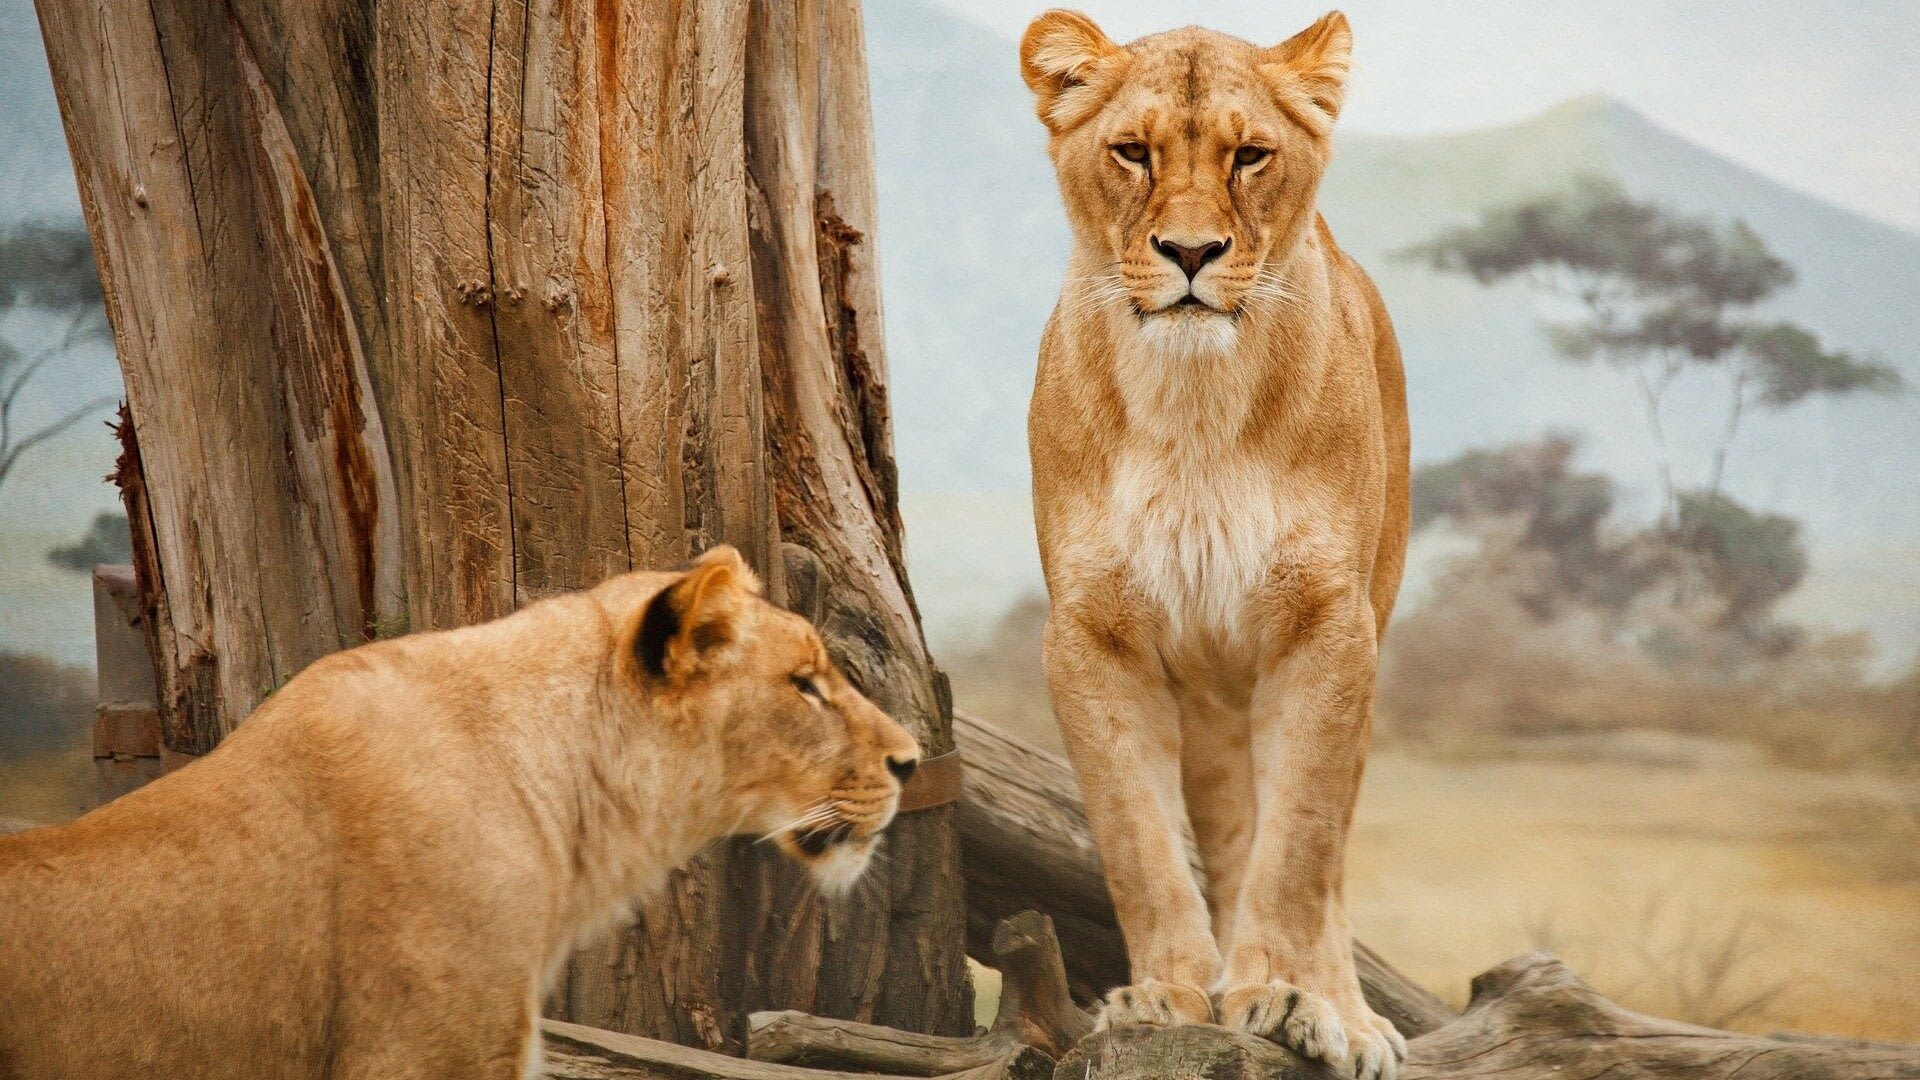 Image: Two lionesses